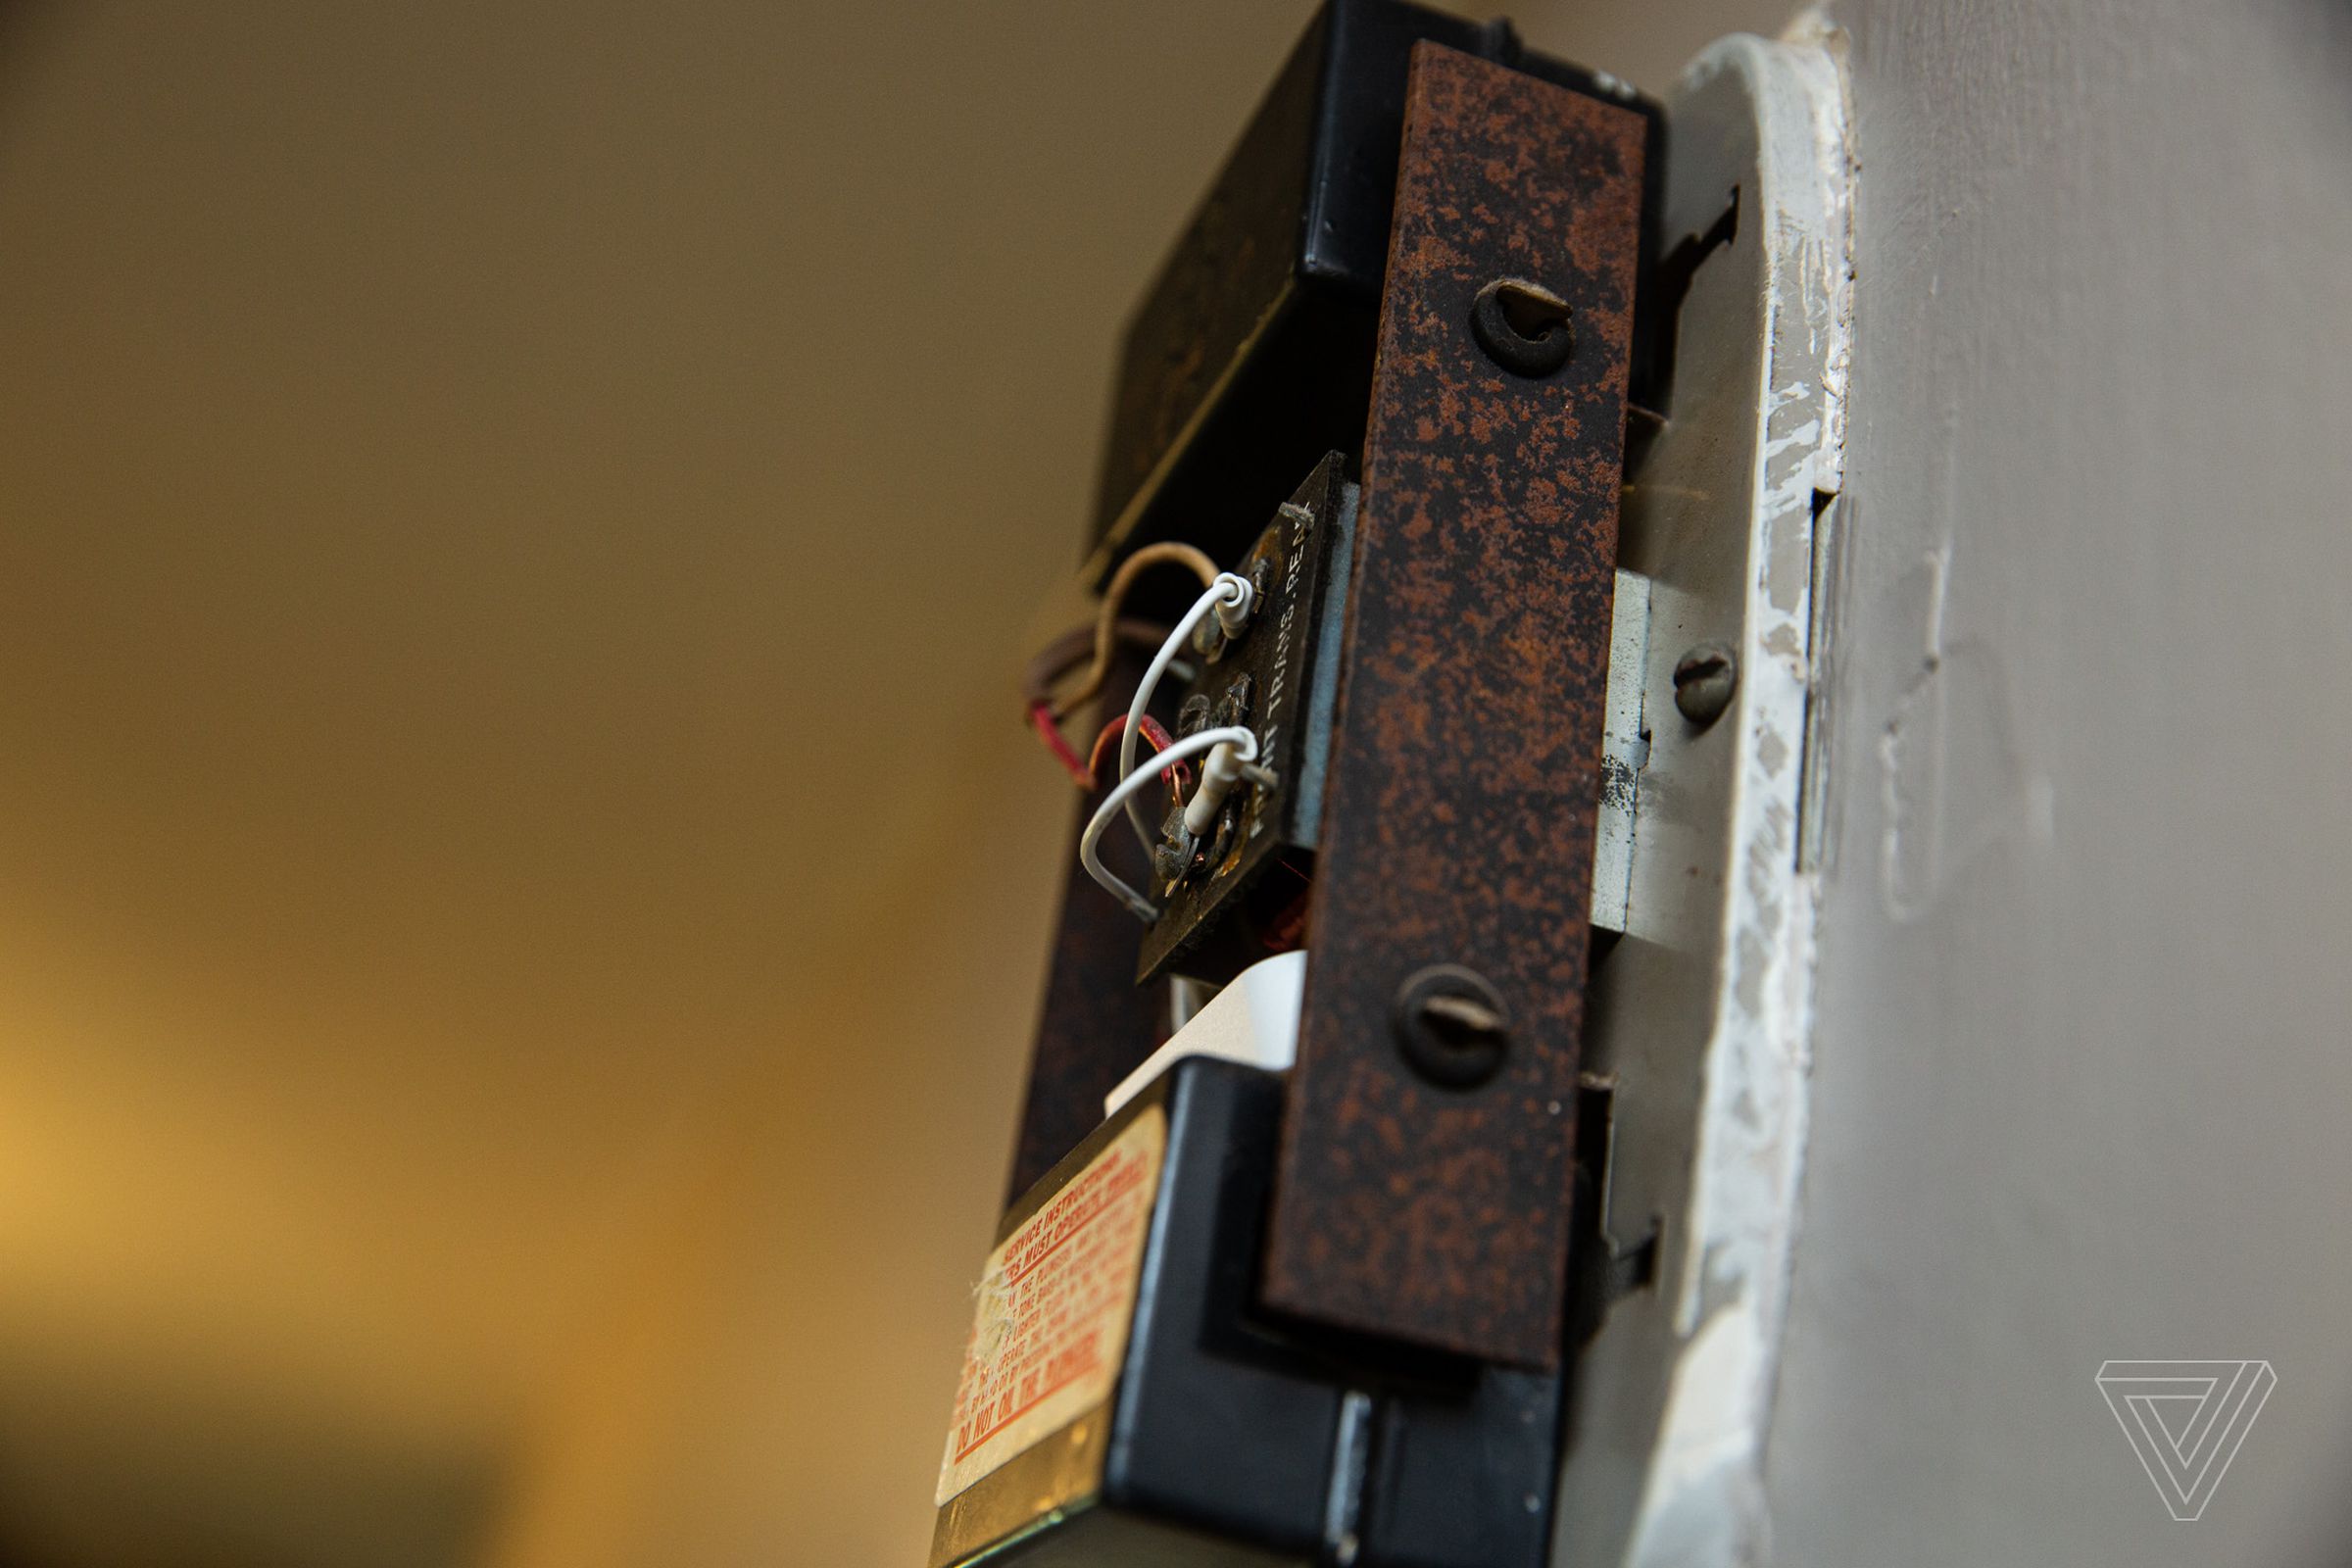 You will need to attach wires to your existing doorbell chime.